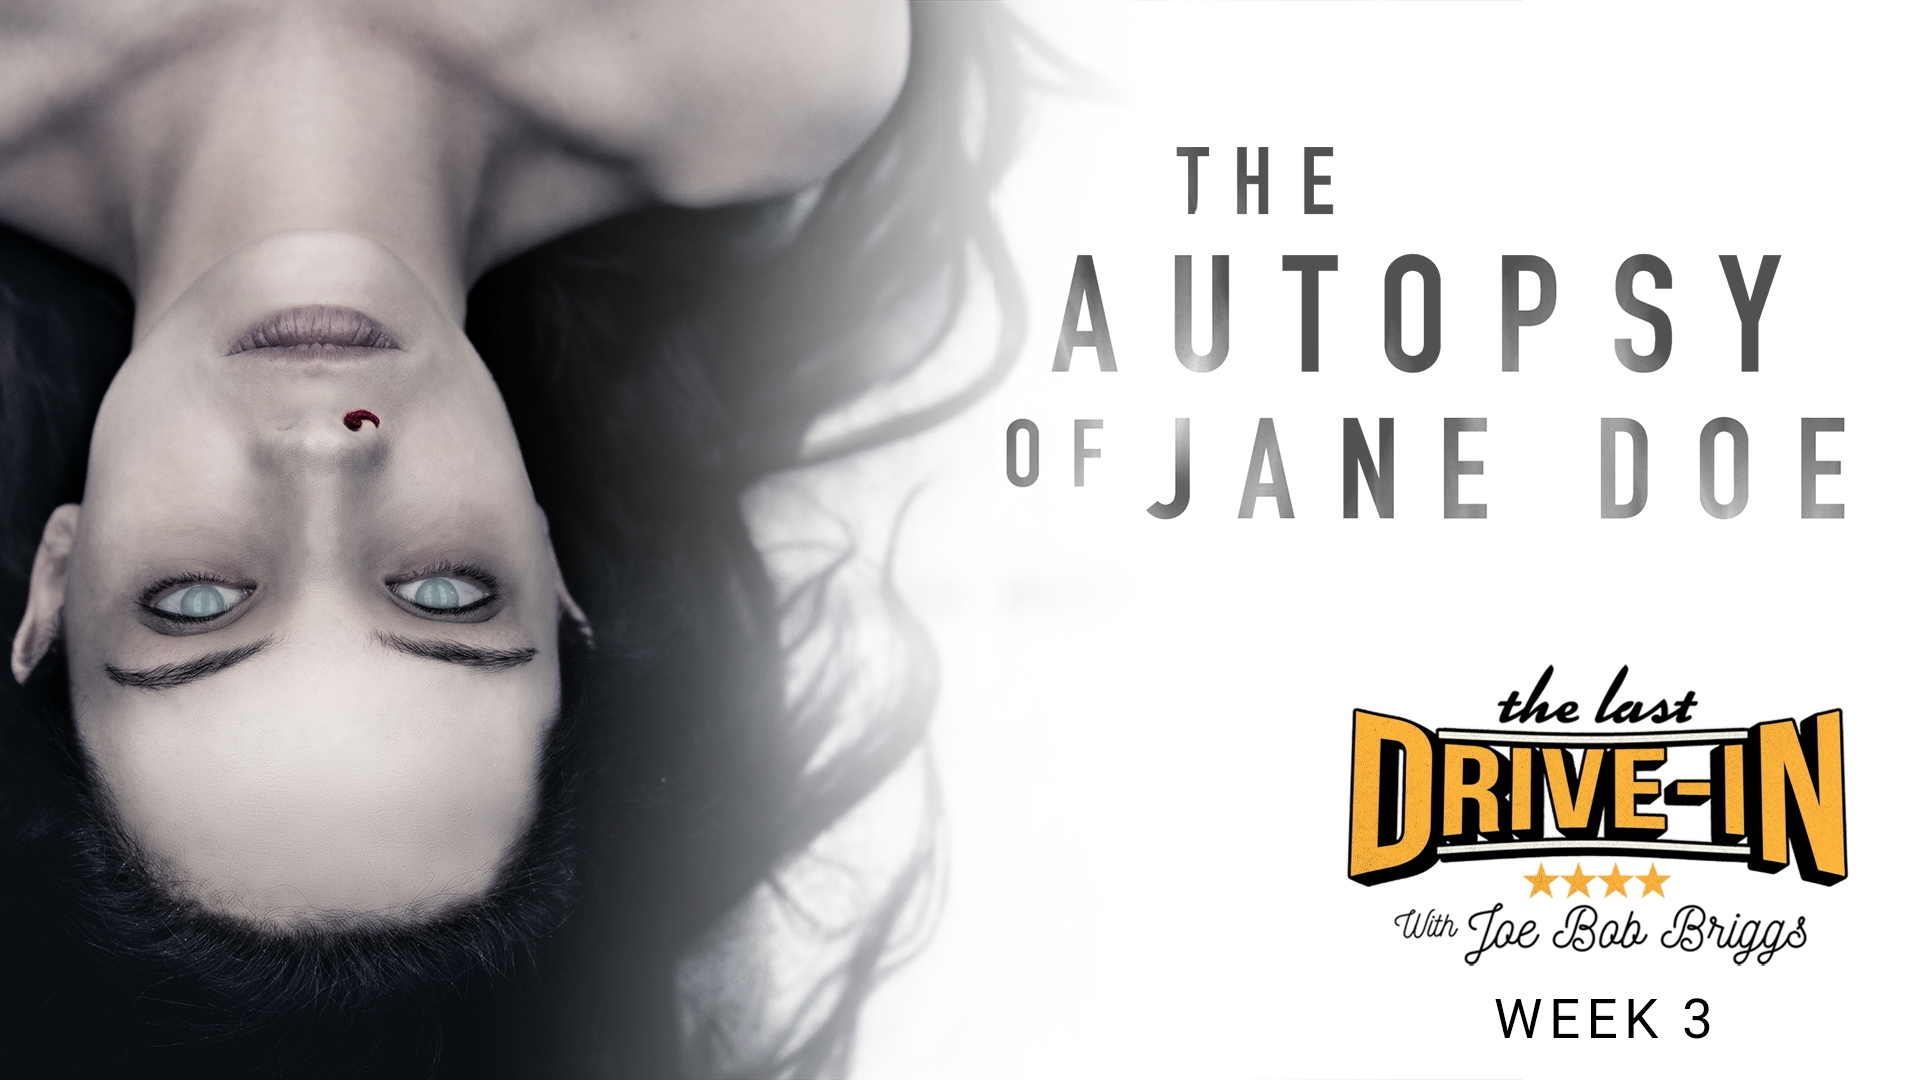 The Autopsy of Jane Doe, An unidentified corpse may not actually be dead., TV-MA, Season 1067704, Episode 3